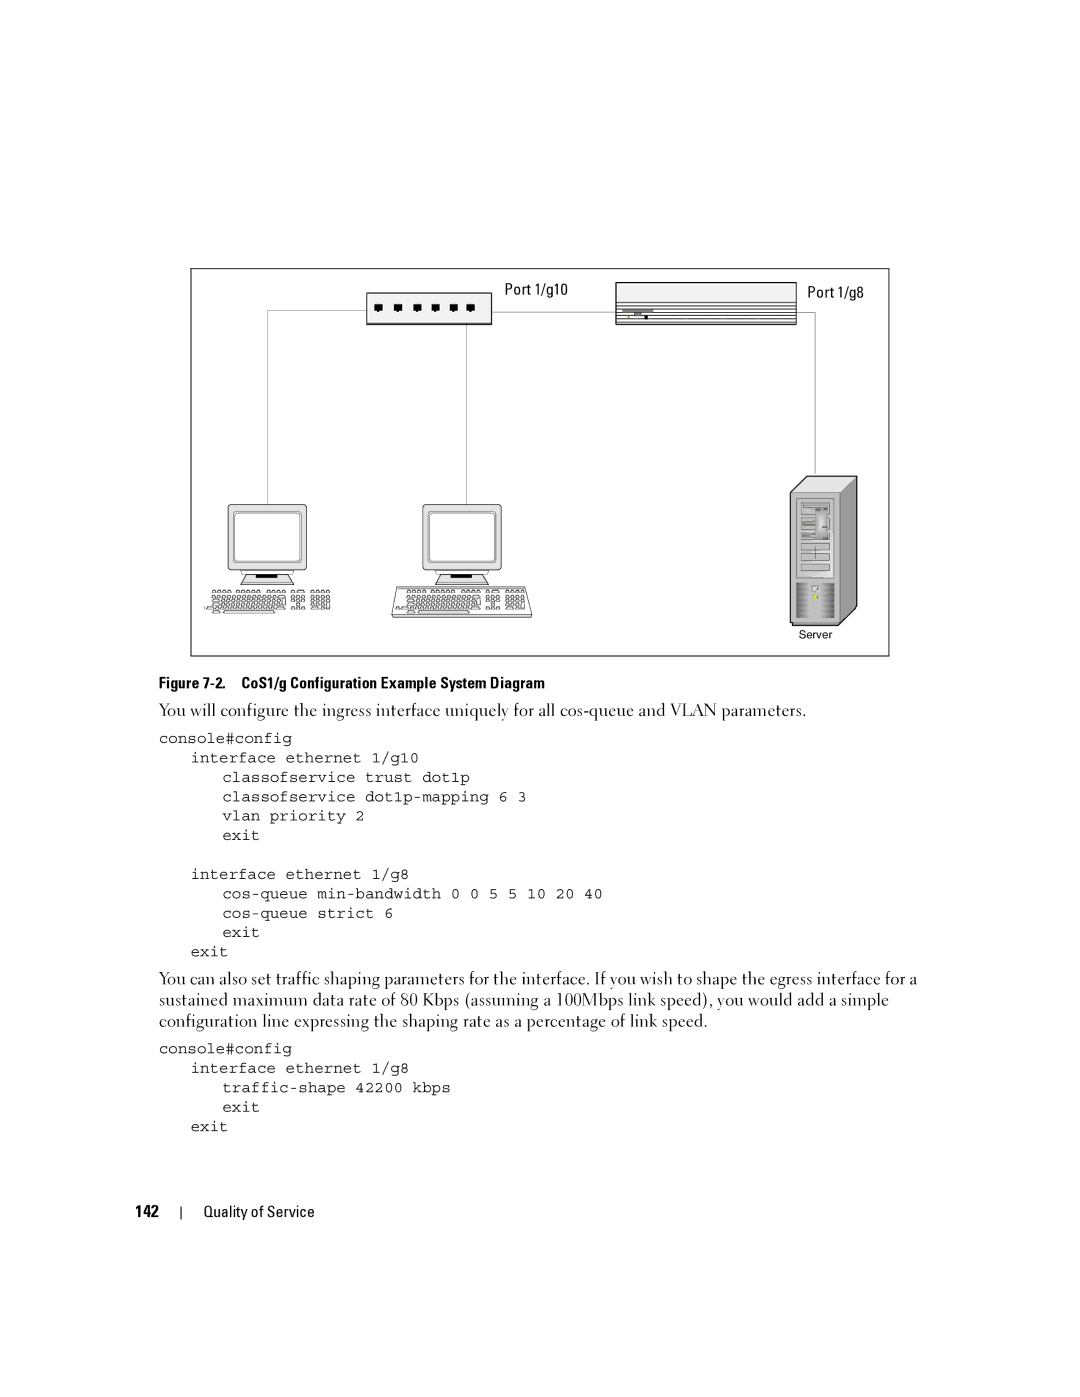 Dell 6200 SERIES manual 142, CoS1/g Configuration Example System Diagram 